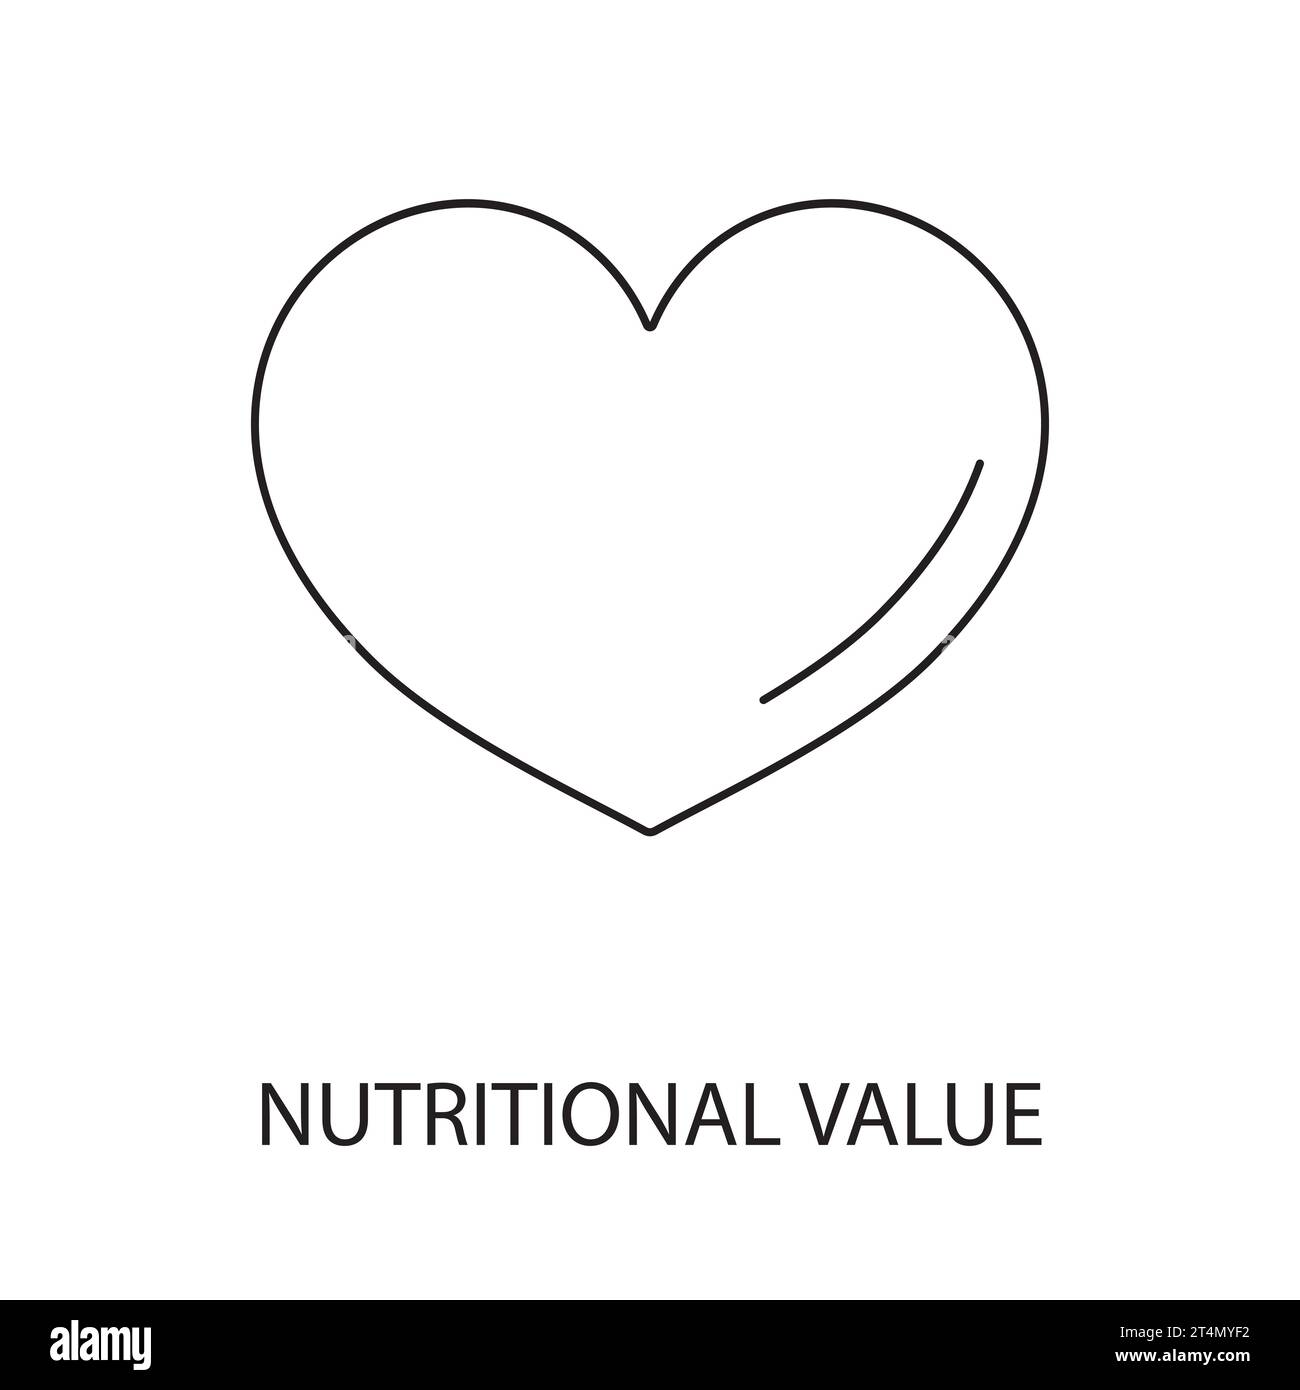 Nutrition facts line icon vector for food packaging, heart illustration. Stock Vector